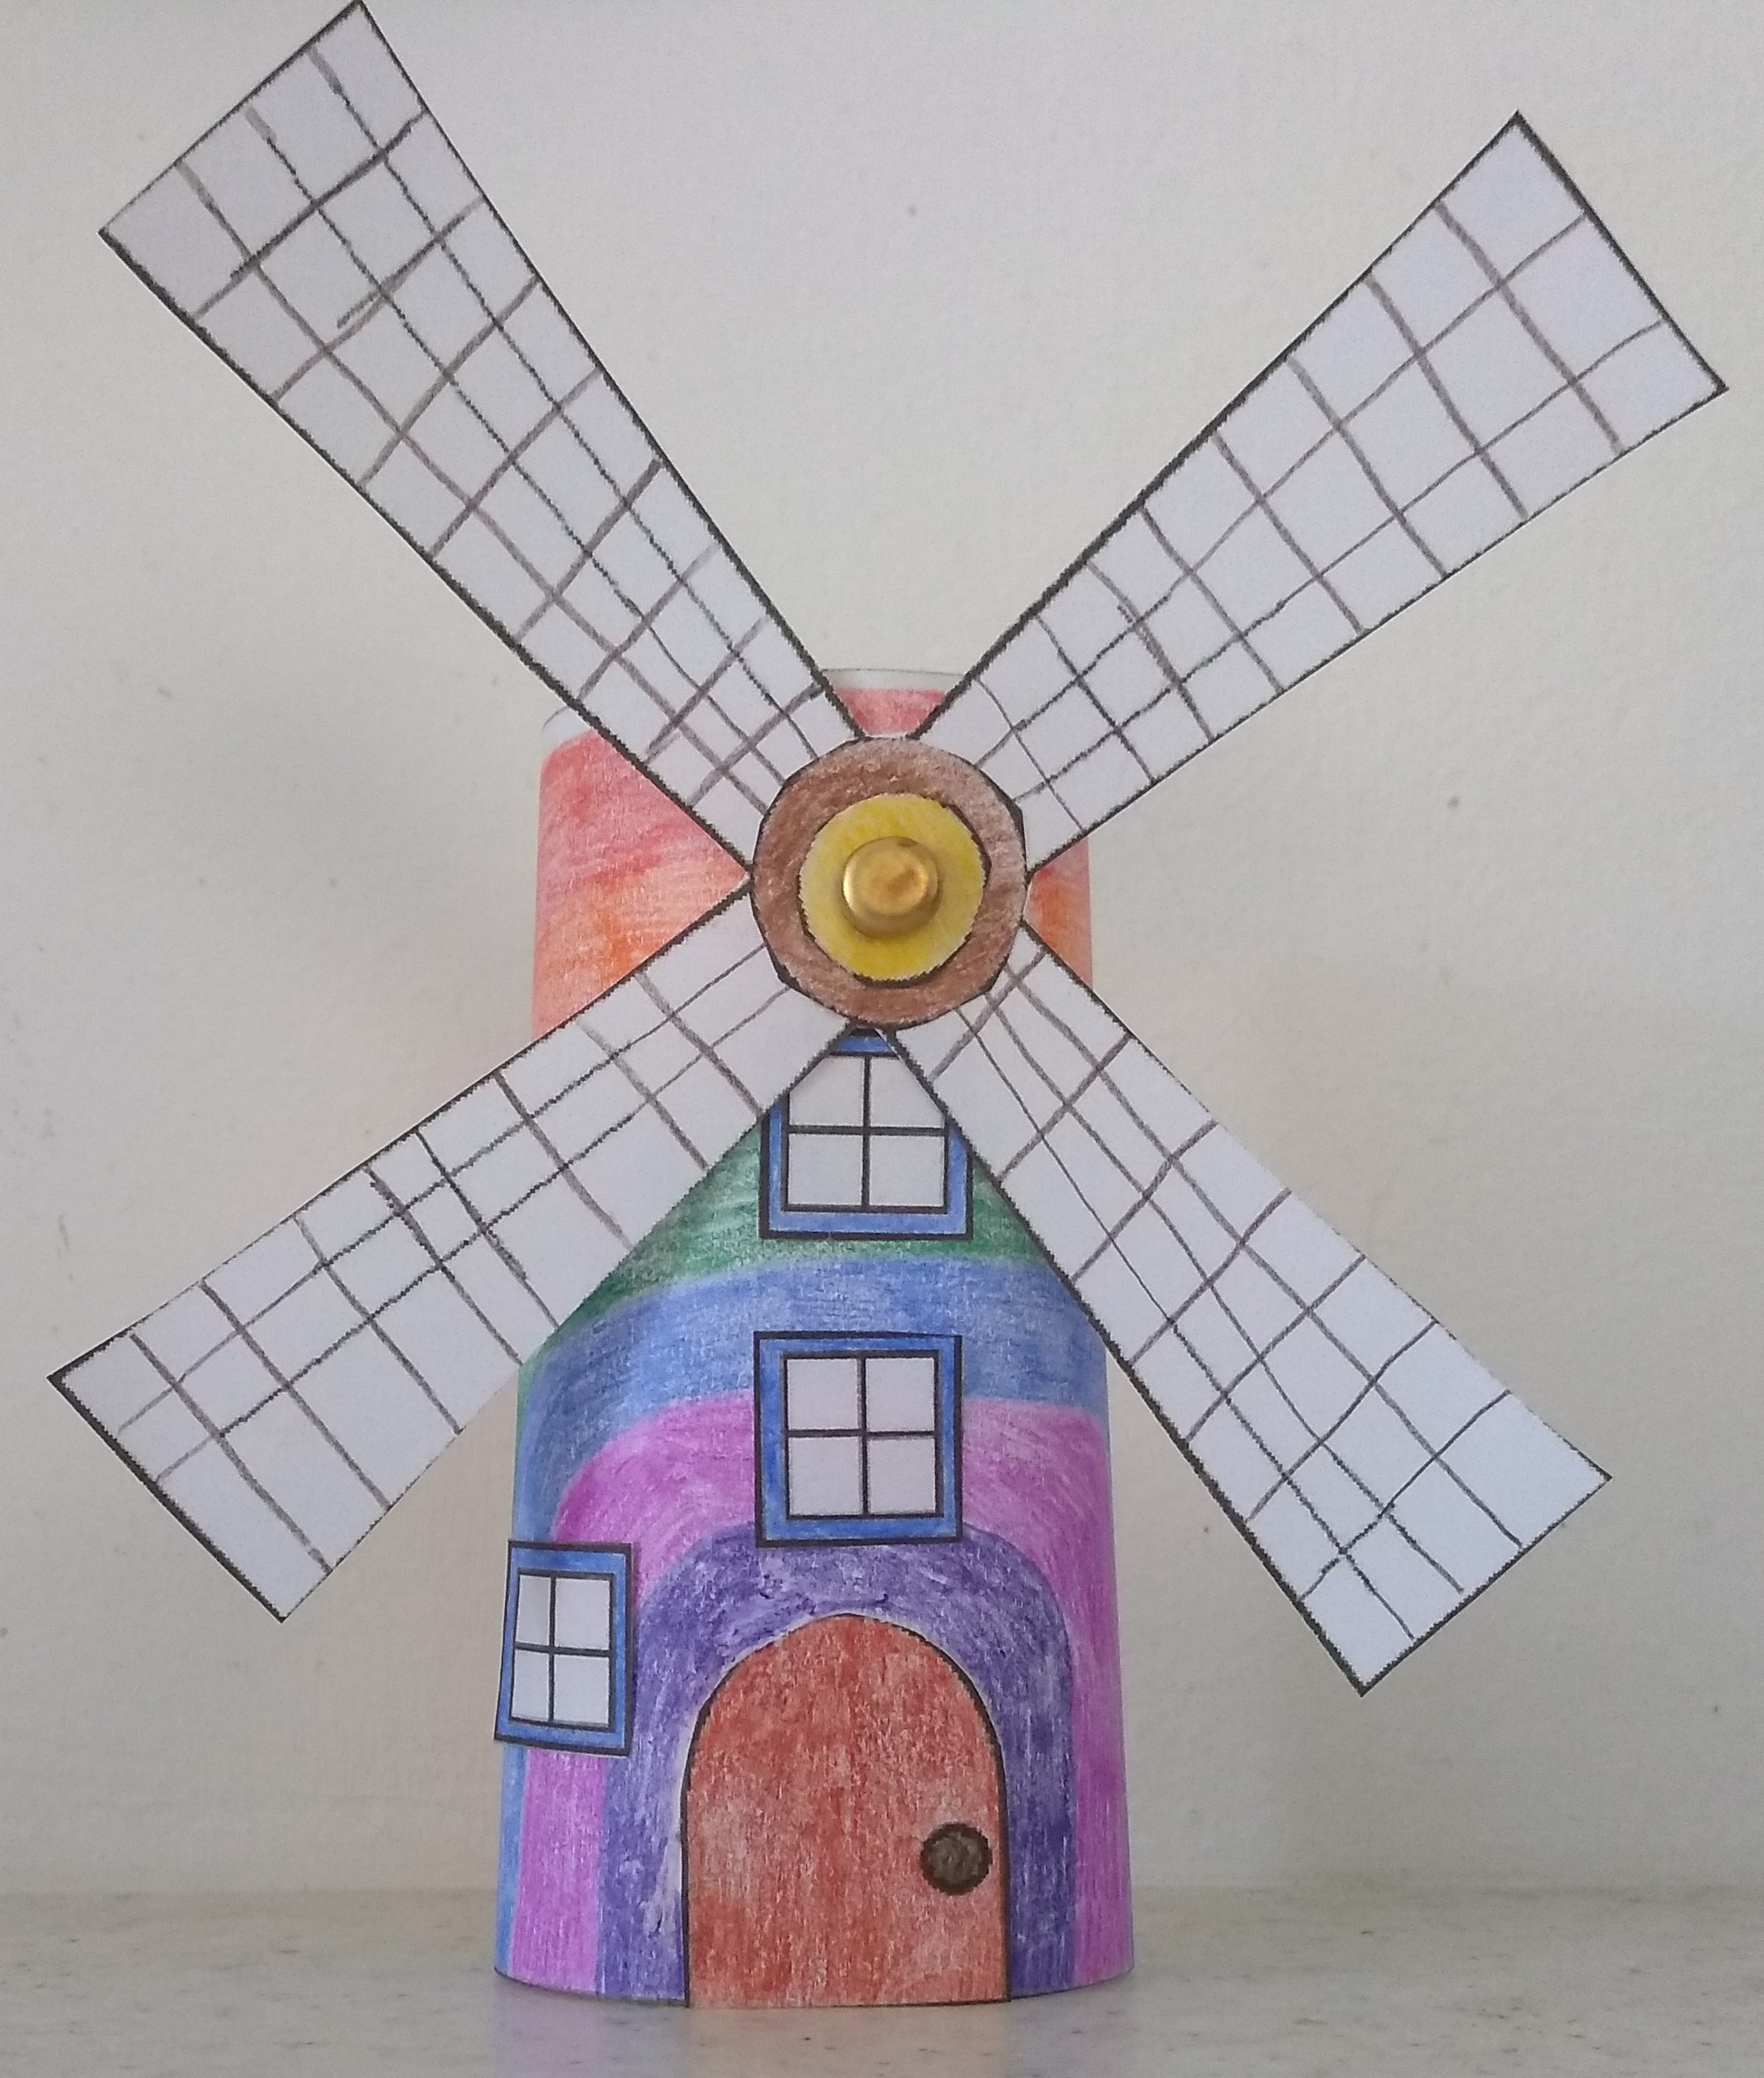 Completed windmill